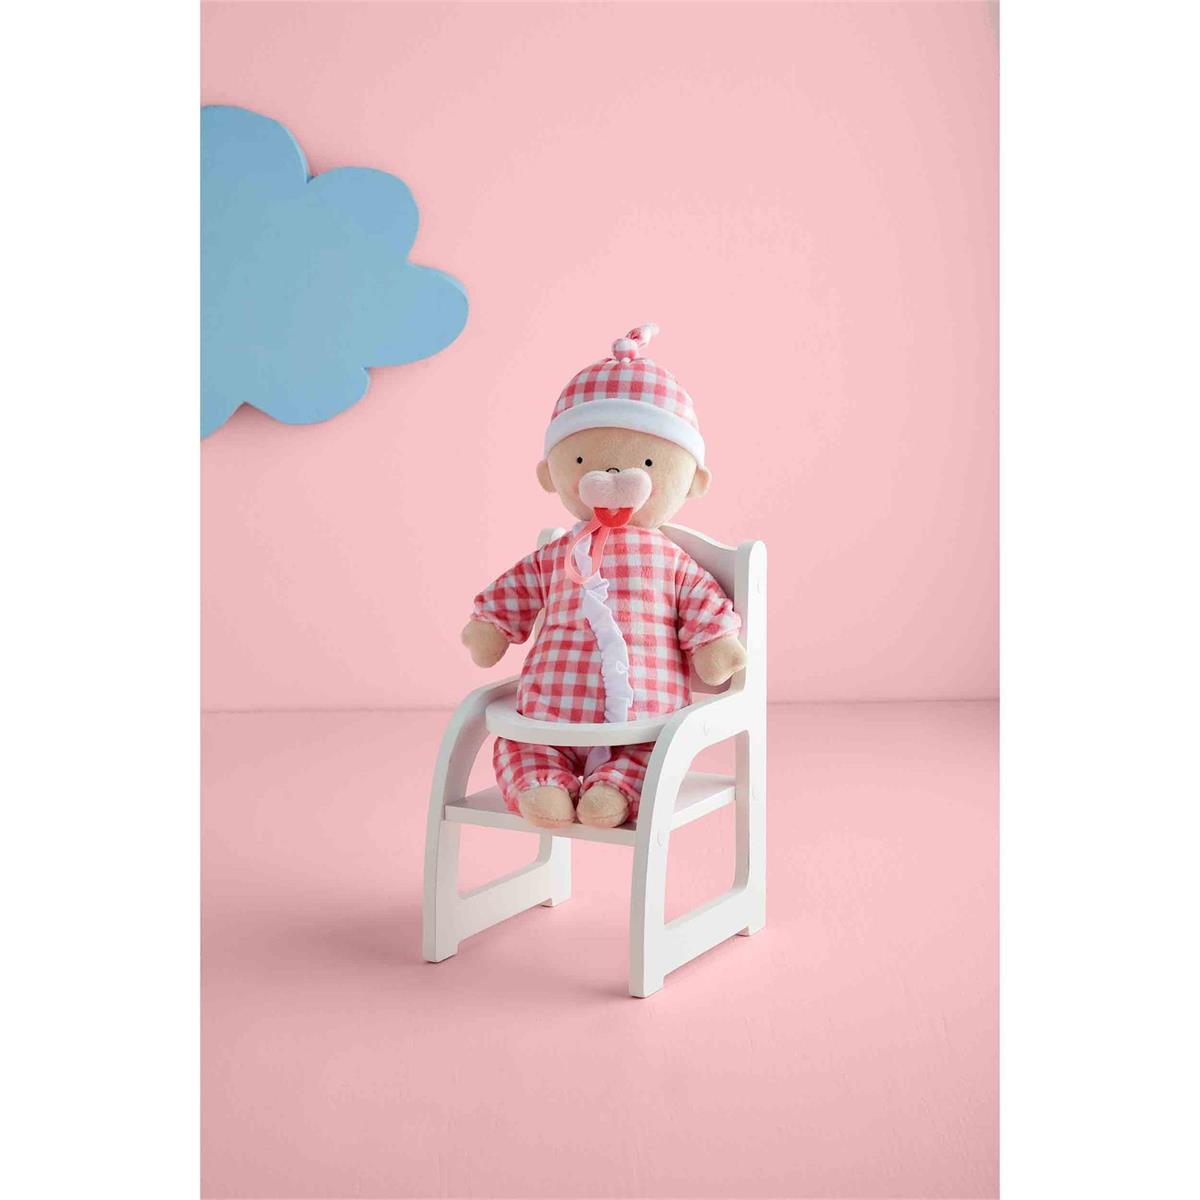 Baby Doll & High Chair Set  - Doodlebug's Children's Boutique